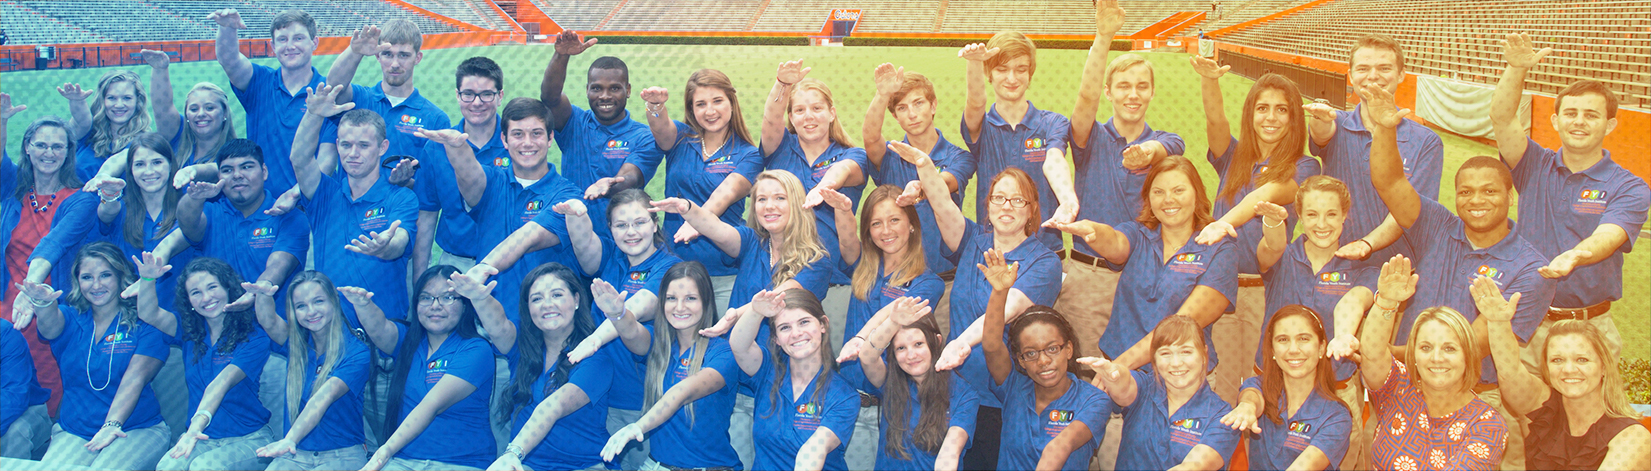 Florida Youth Institute participants and counselors pose wearing blue polos at the UF Ben Hill Griffith stadium.